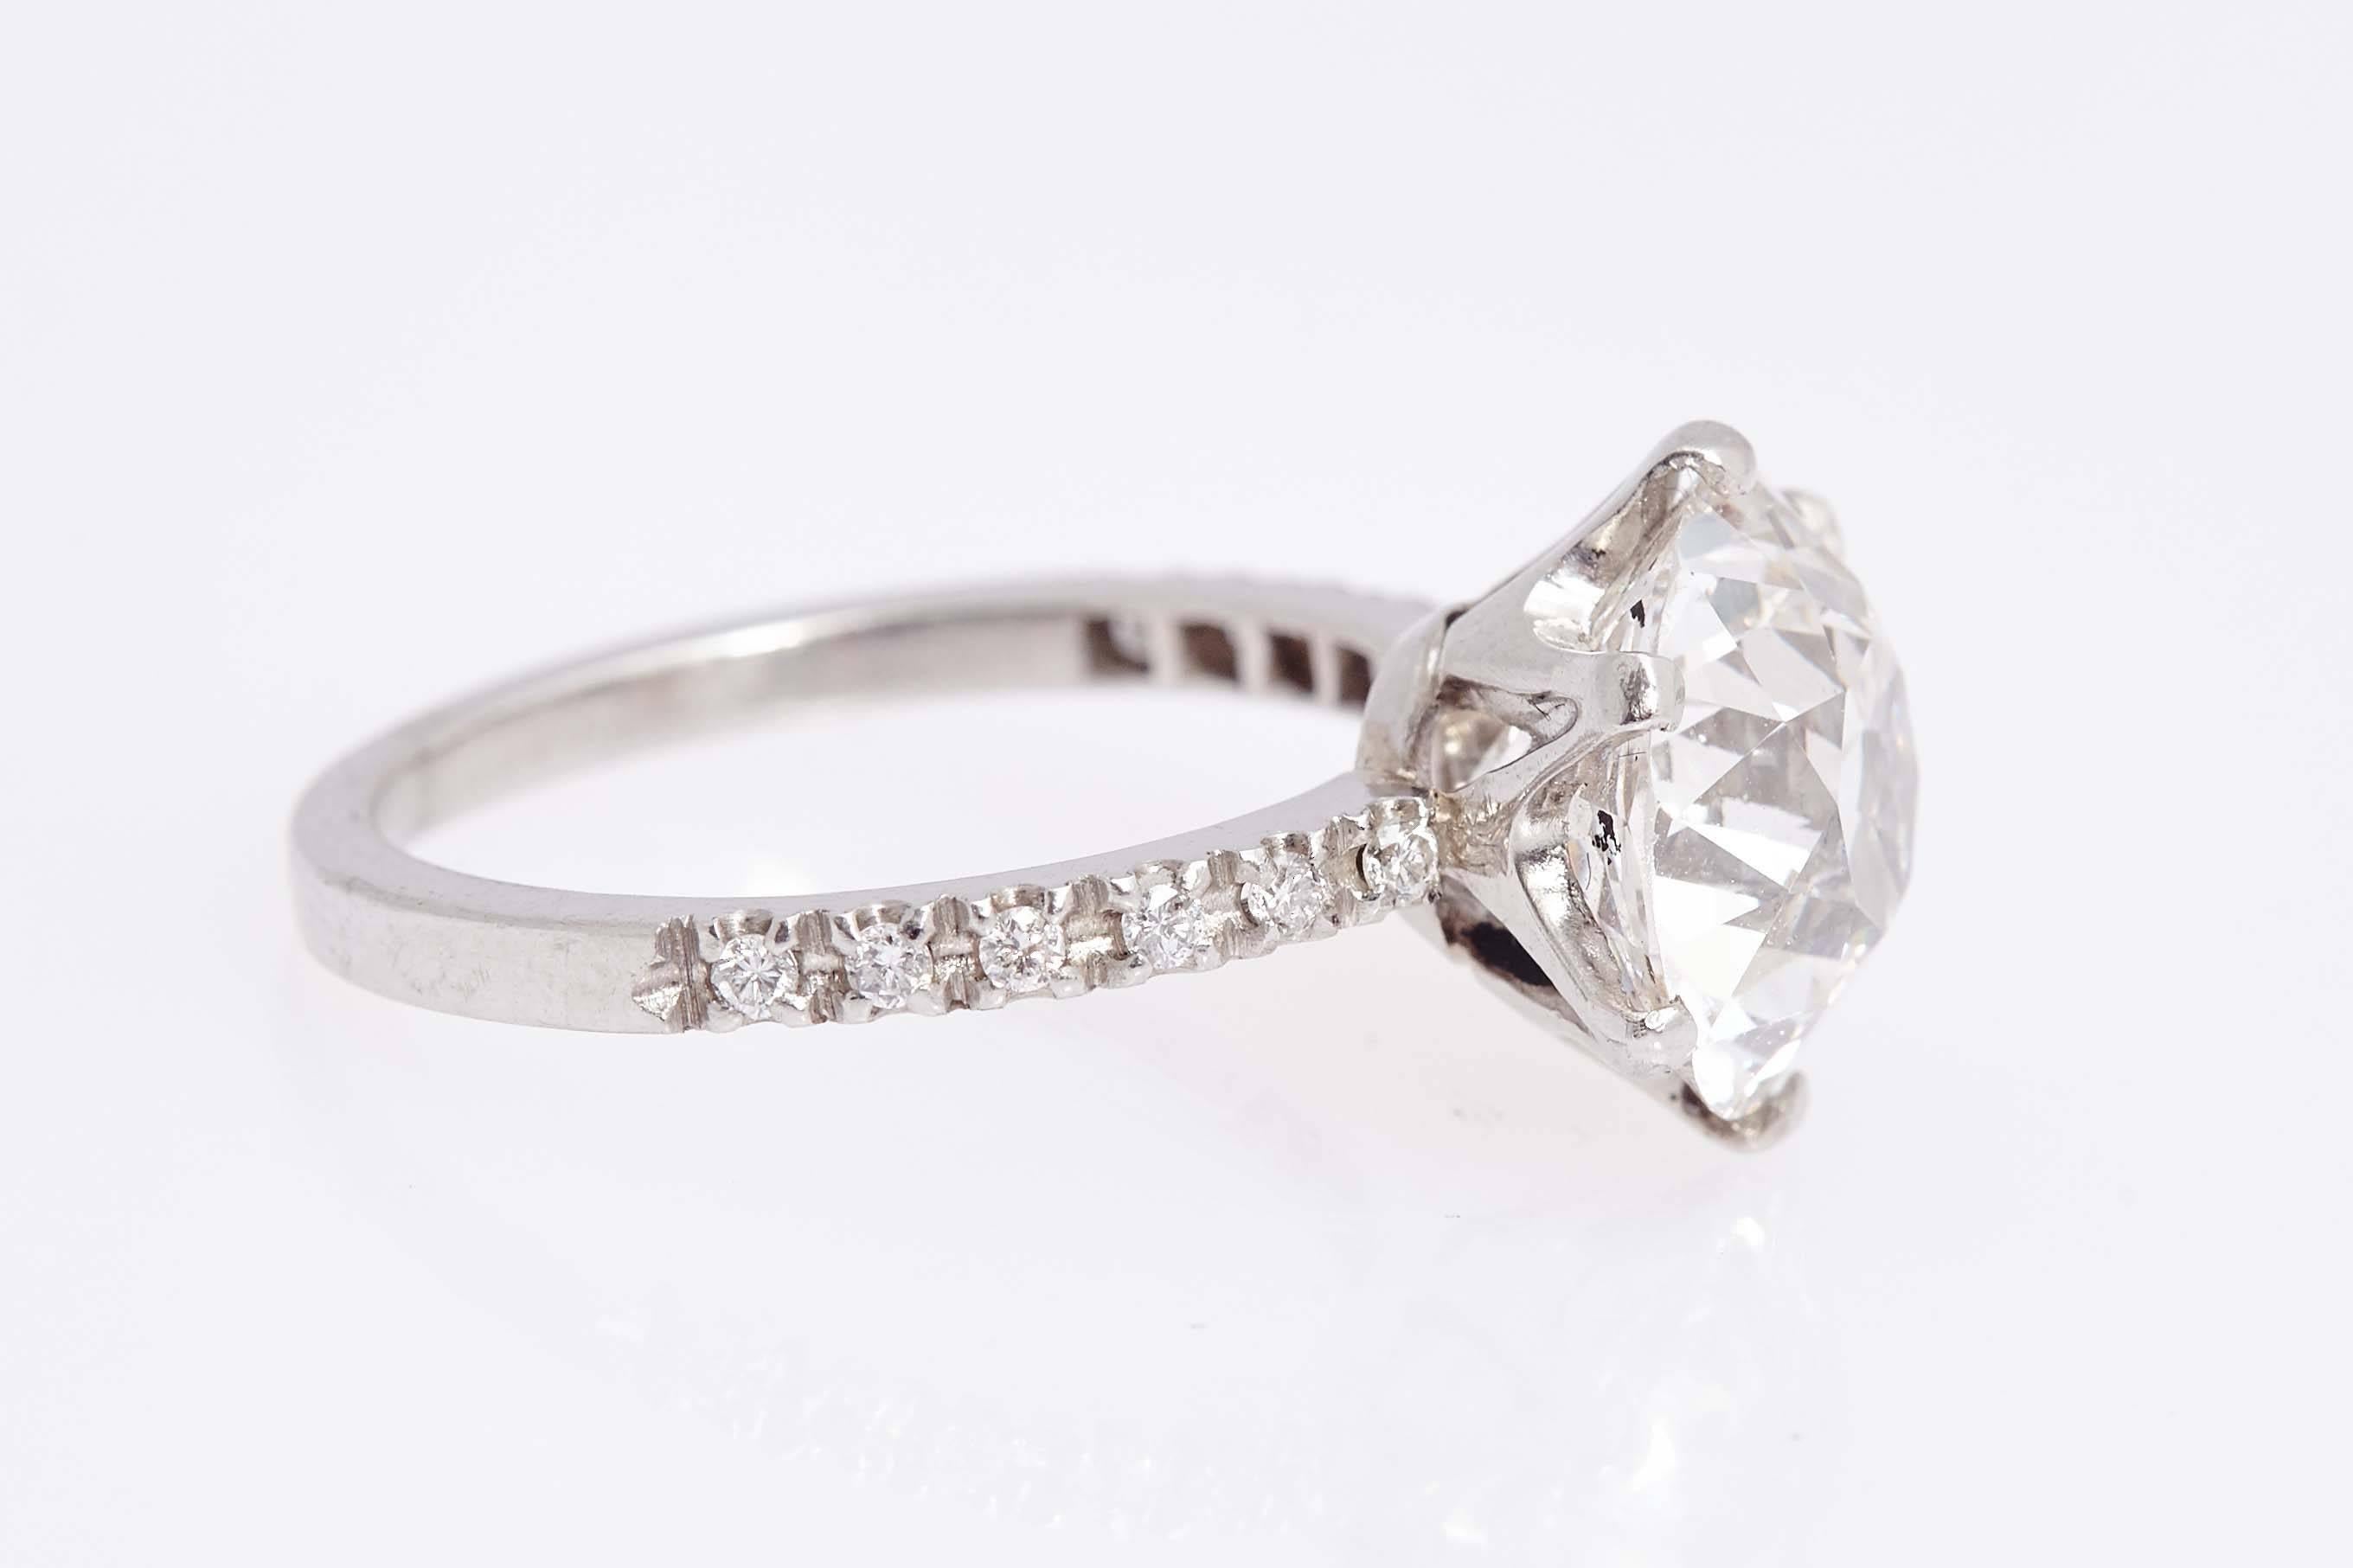 A classic 1930s engagement/solitaire ring featuring a rare type II A old-cut diamond weighing 5.59 cts, of I colour and VS1 clarity (certificate available). Smaller diamonds along half the band to enhance the fine platinum mounting. The stone is